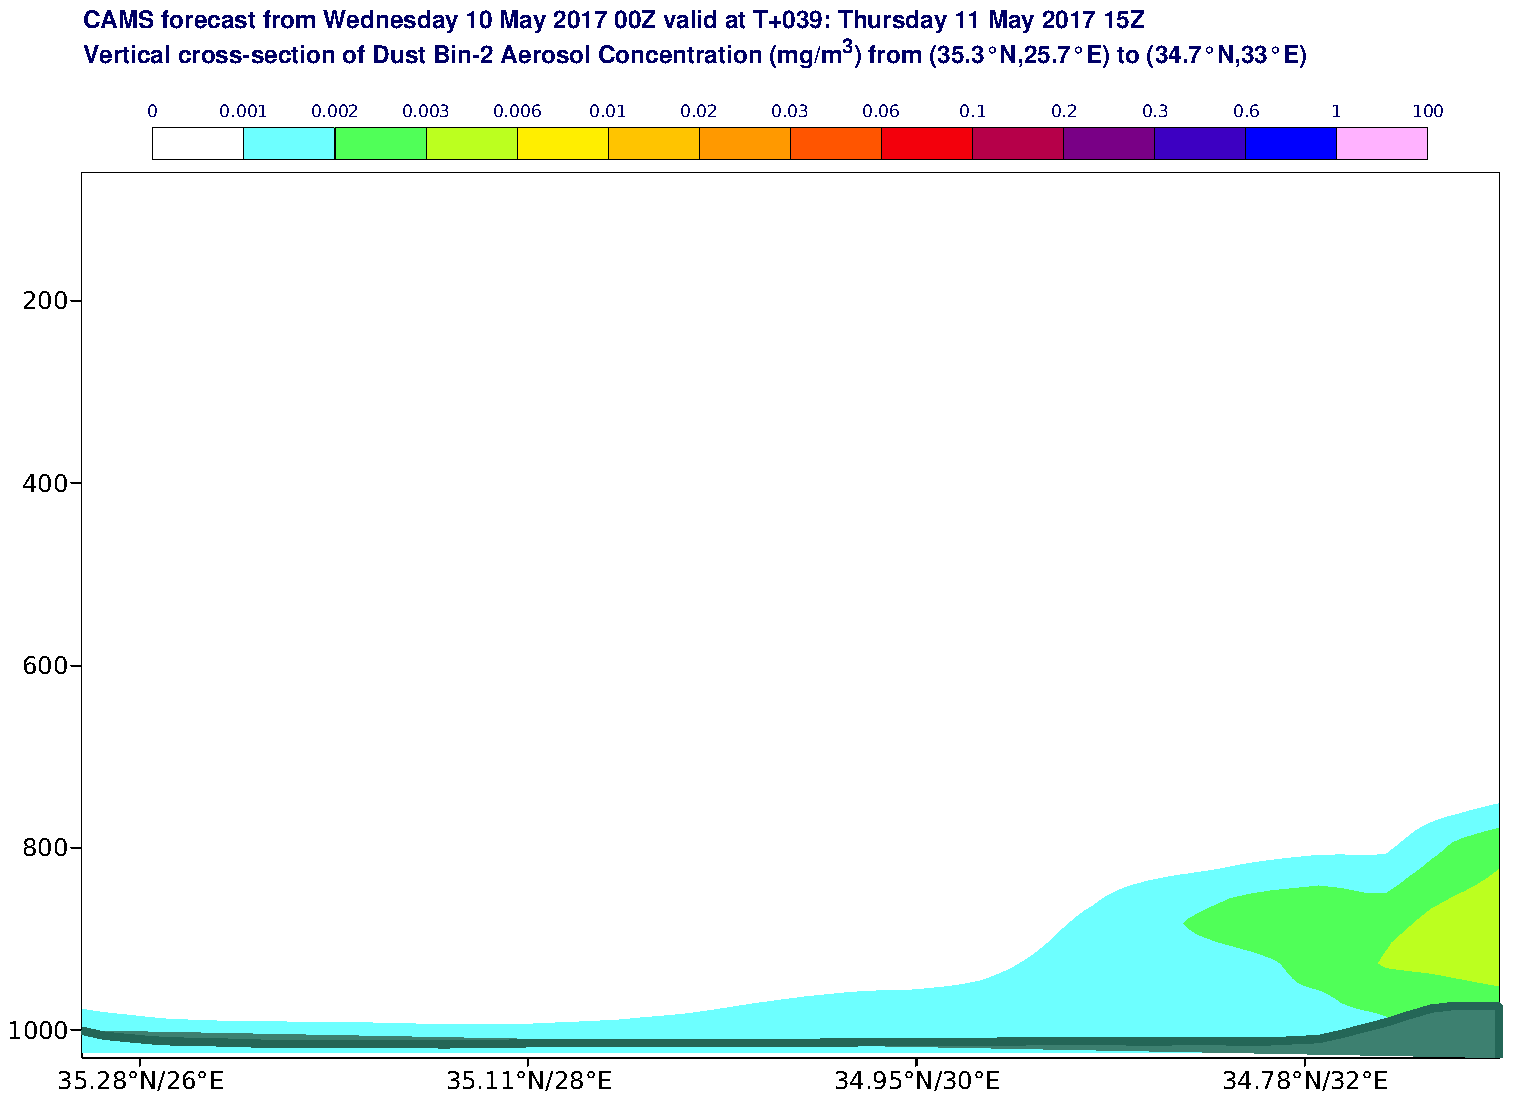 Vertical cross-section of Dust Bin-2 Aerosol Concentration (mg/m3) valid at T39 - 2017-05-11 15:00